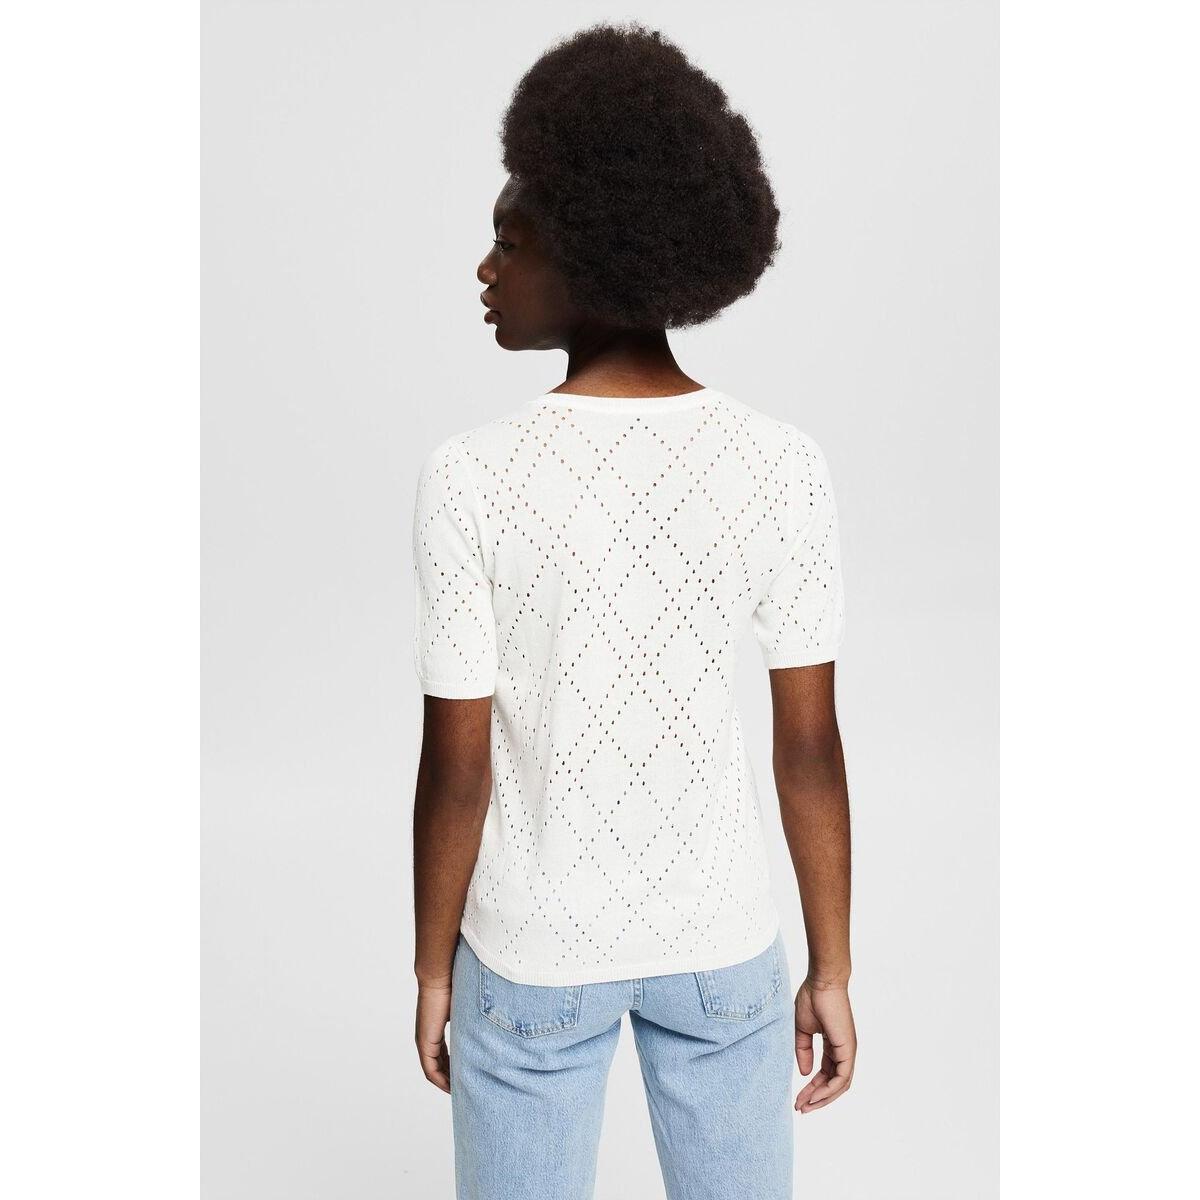 Esprit - Linen Blend Knitted Top in Off White-SQ6602491